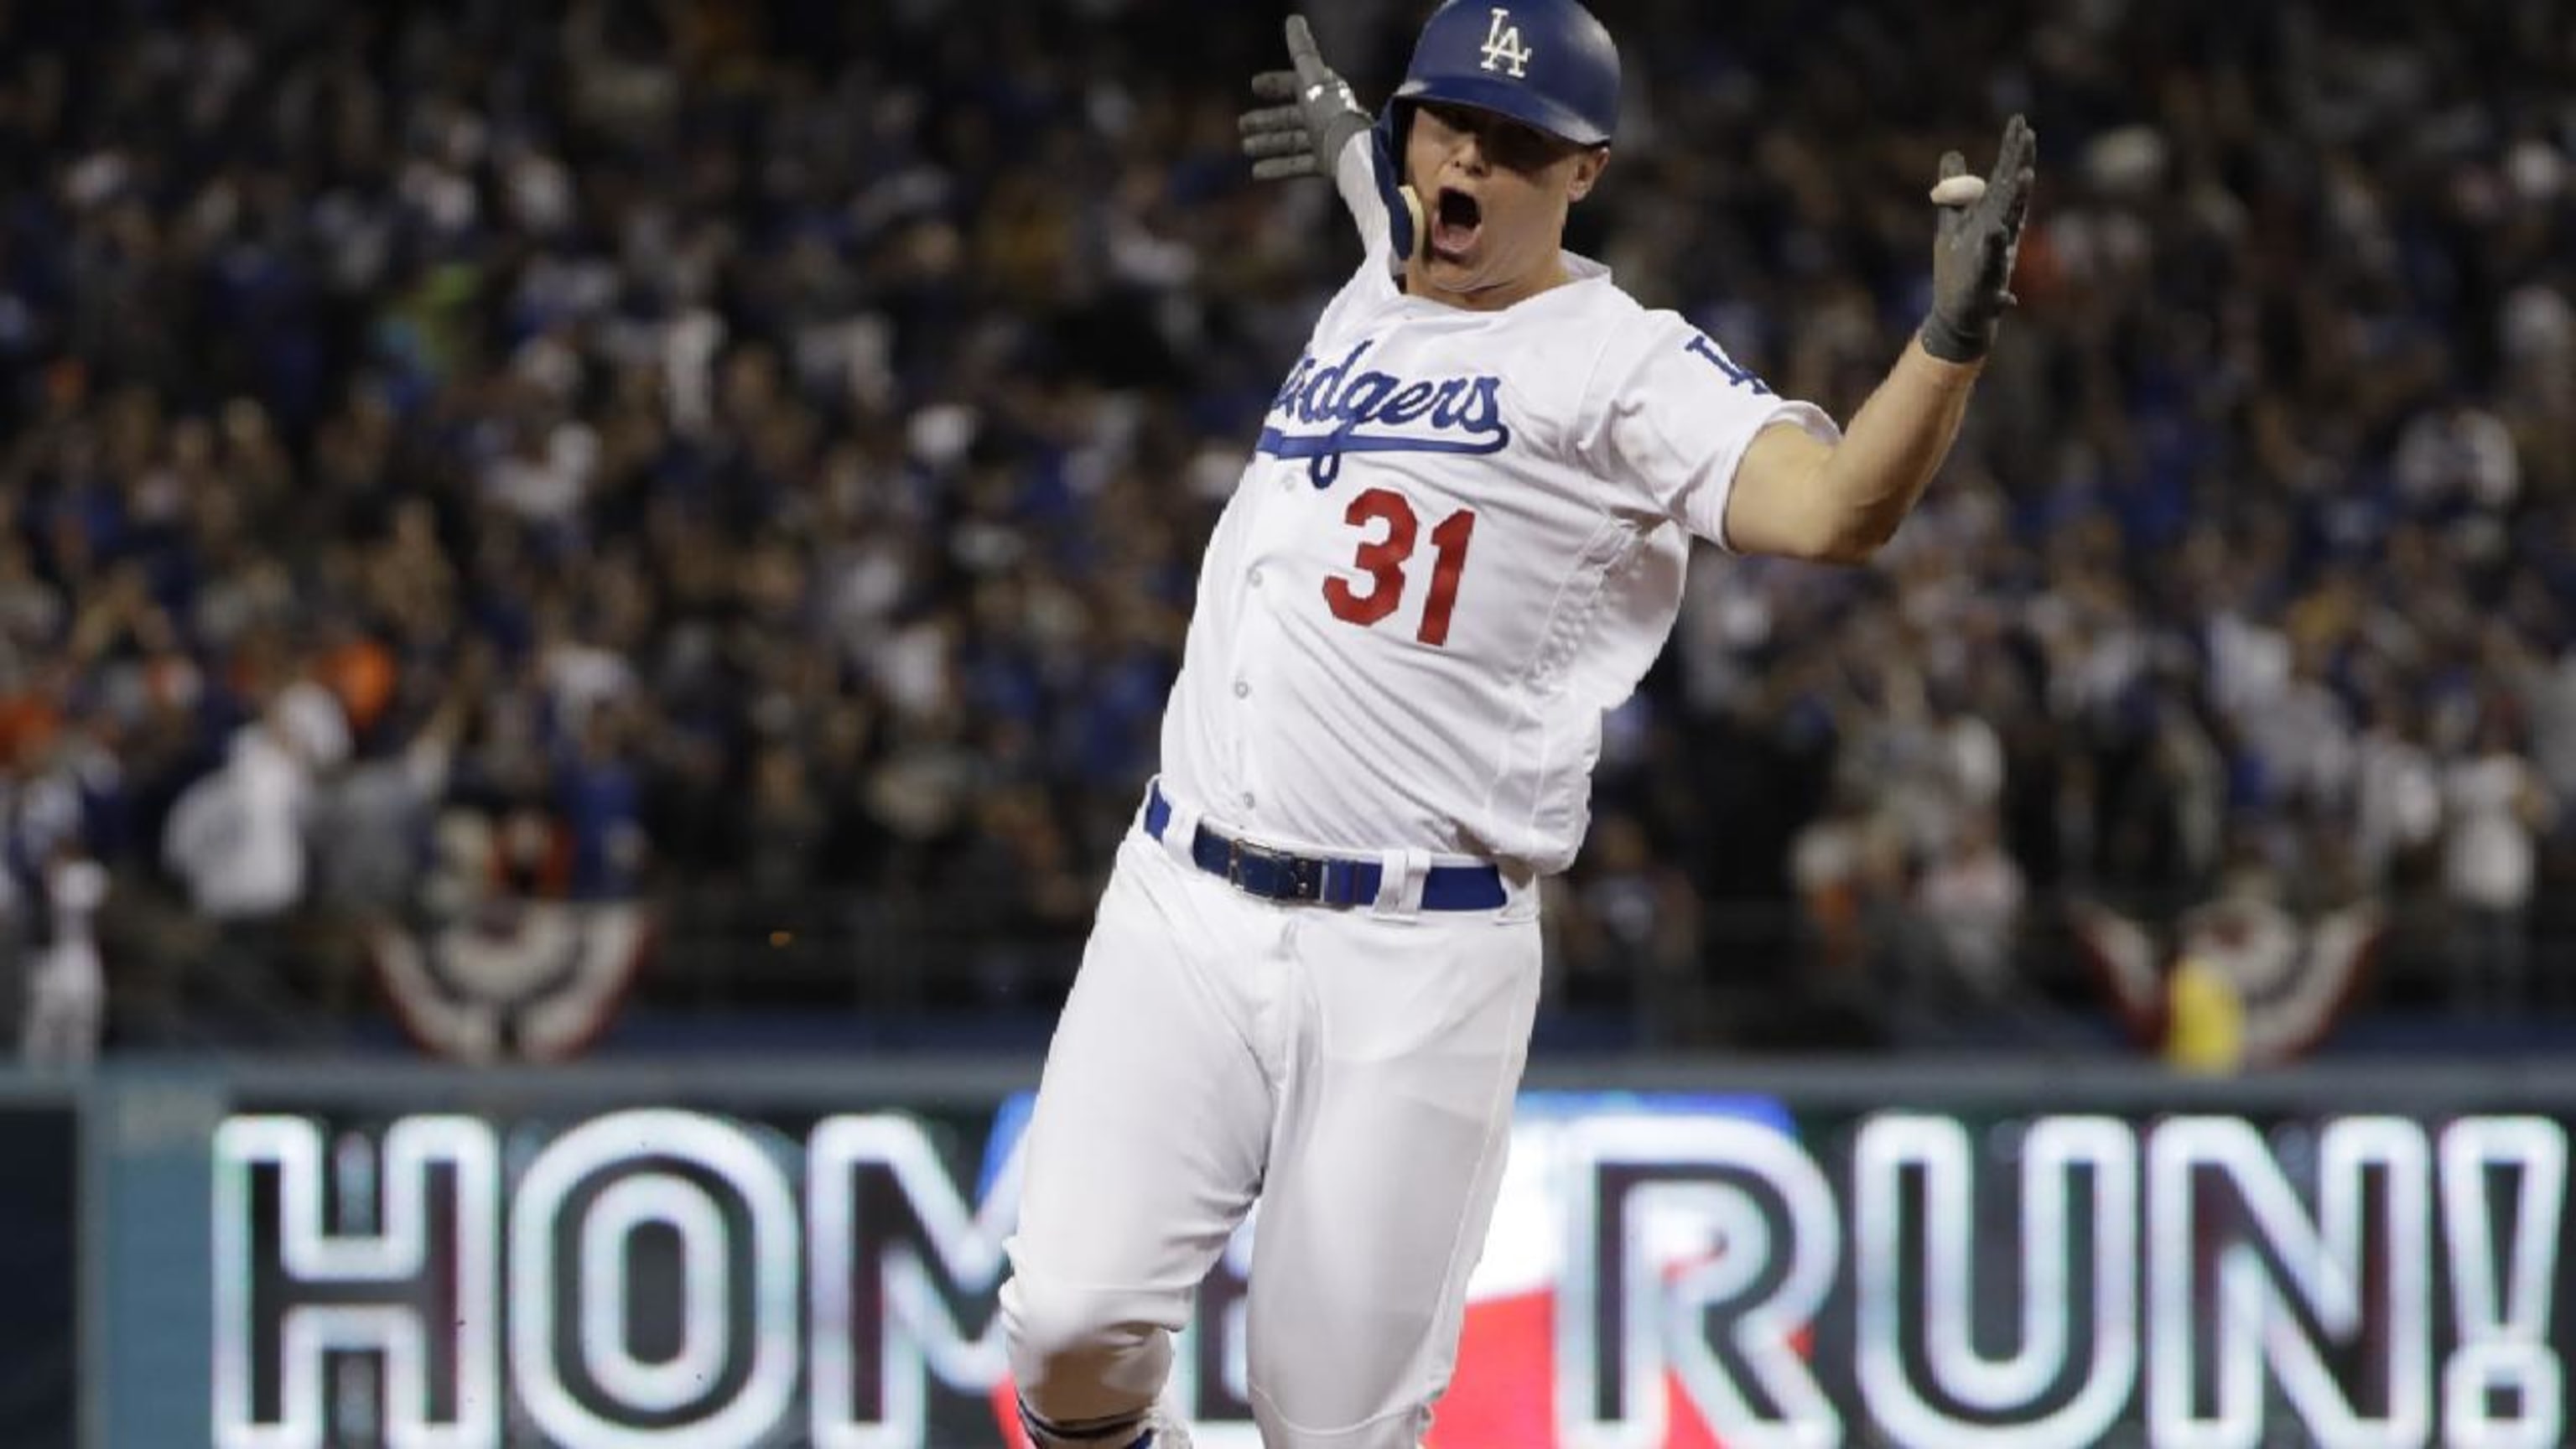 With bounce in his step, Los Angeles Dodgers' Joc Pederson turns